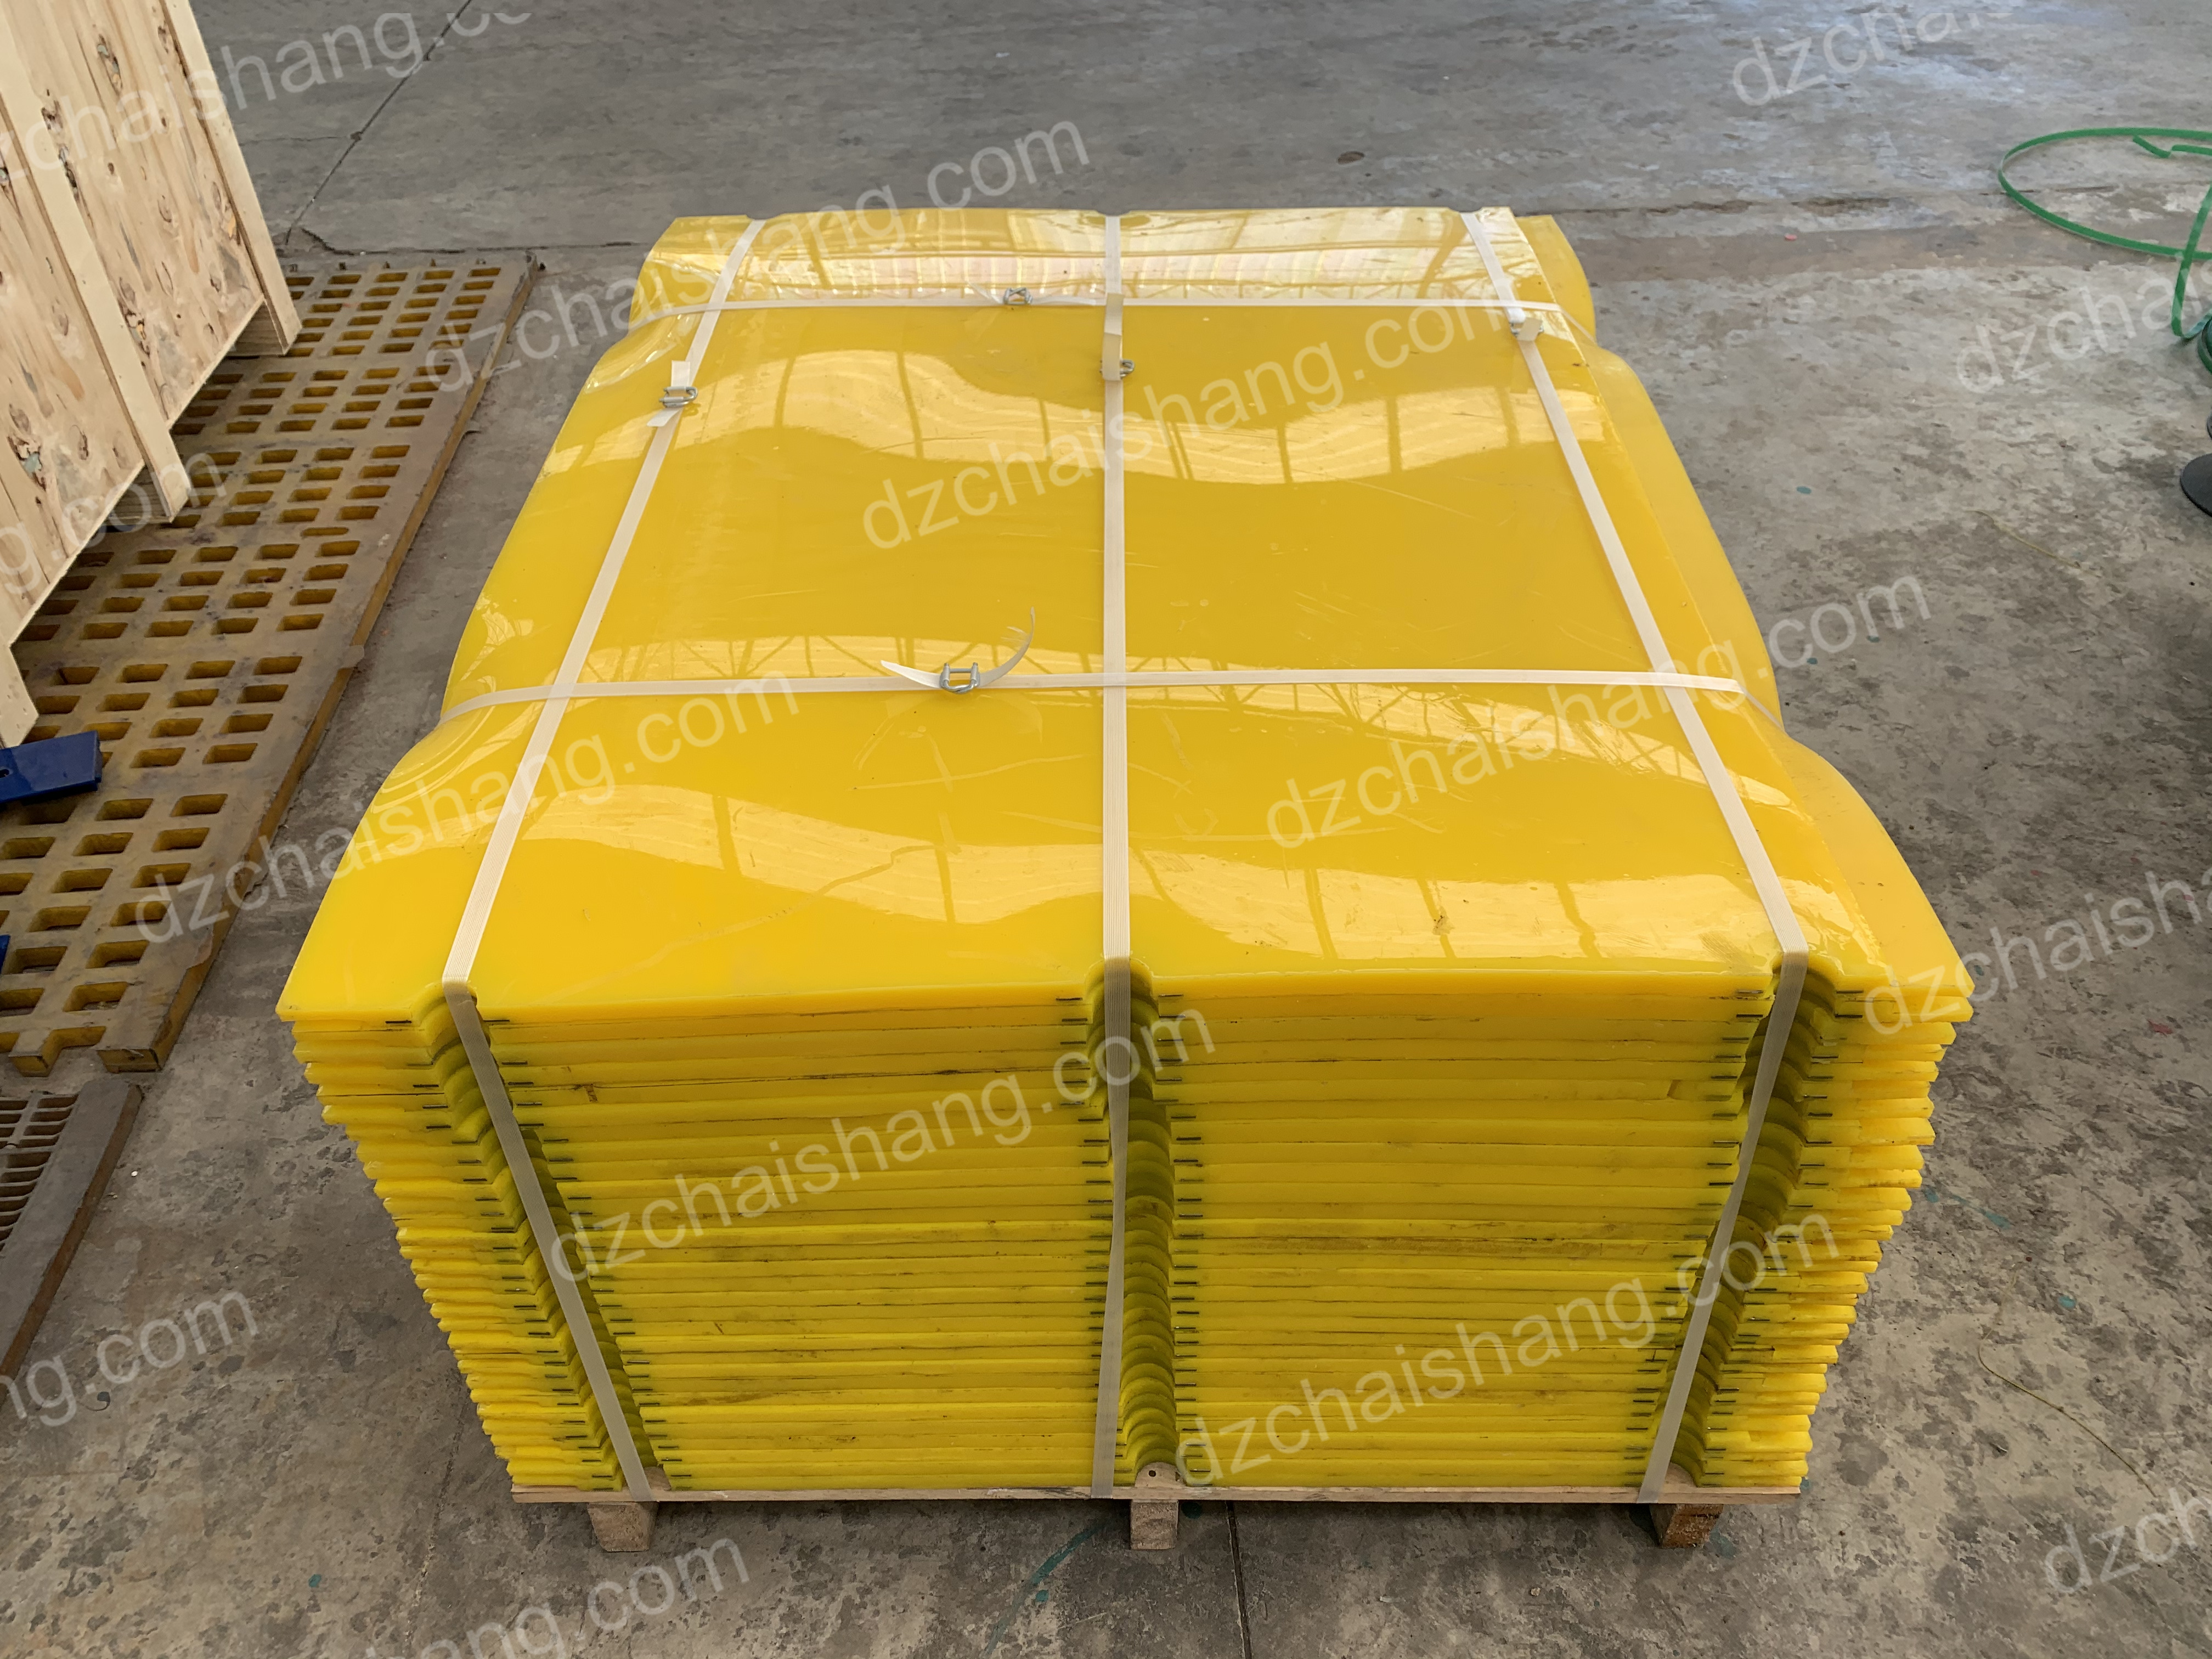 China Polyurethane tensioned plate,pu screen with sound,polyurethane screen 0.5-CHAISHANG | Polyurethane Screen,Rubber Screen Panels,Polyweb Screen,Belt Cleaner,Flotion Cell